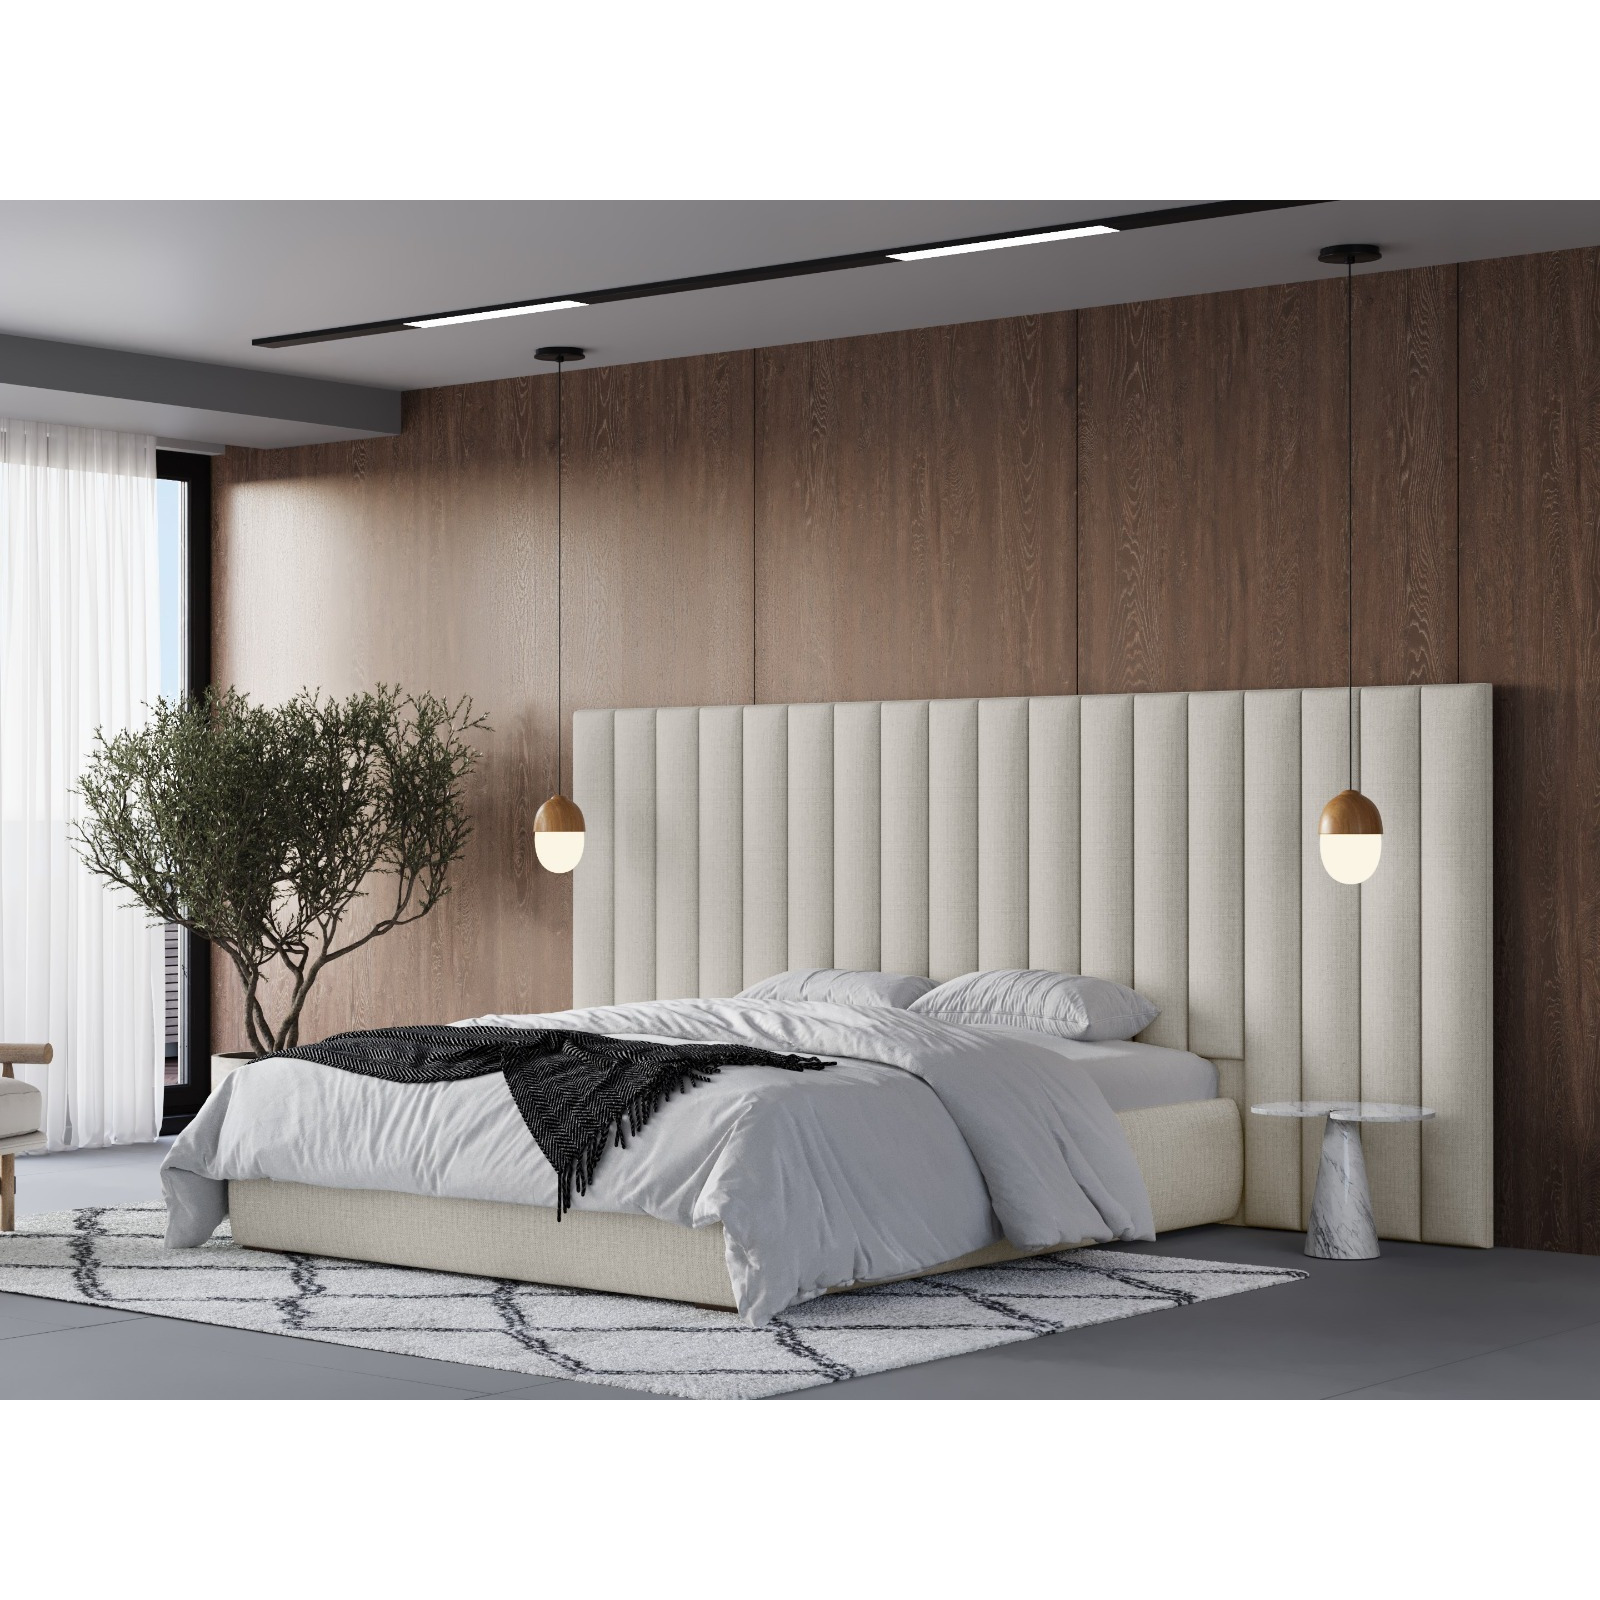 Flair Rosita Hotel Bed With Wide Panelled Headboard Cream Kingsize - image 1